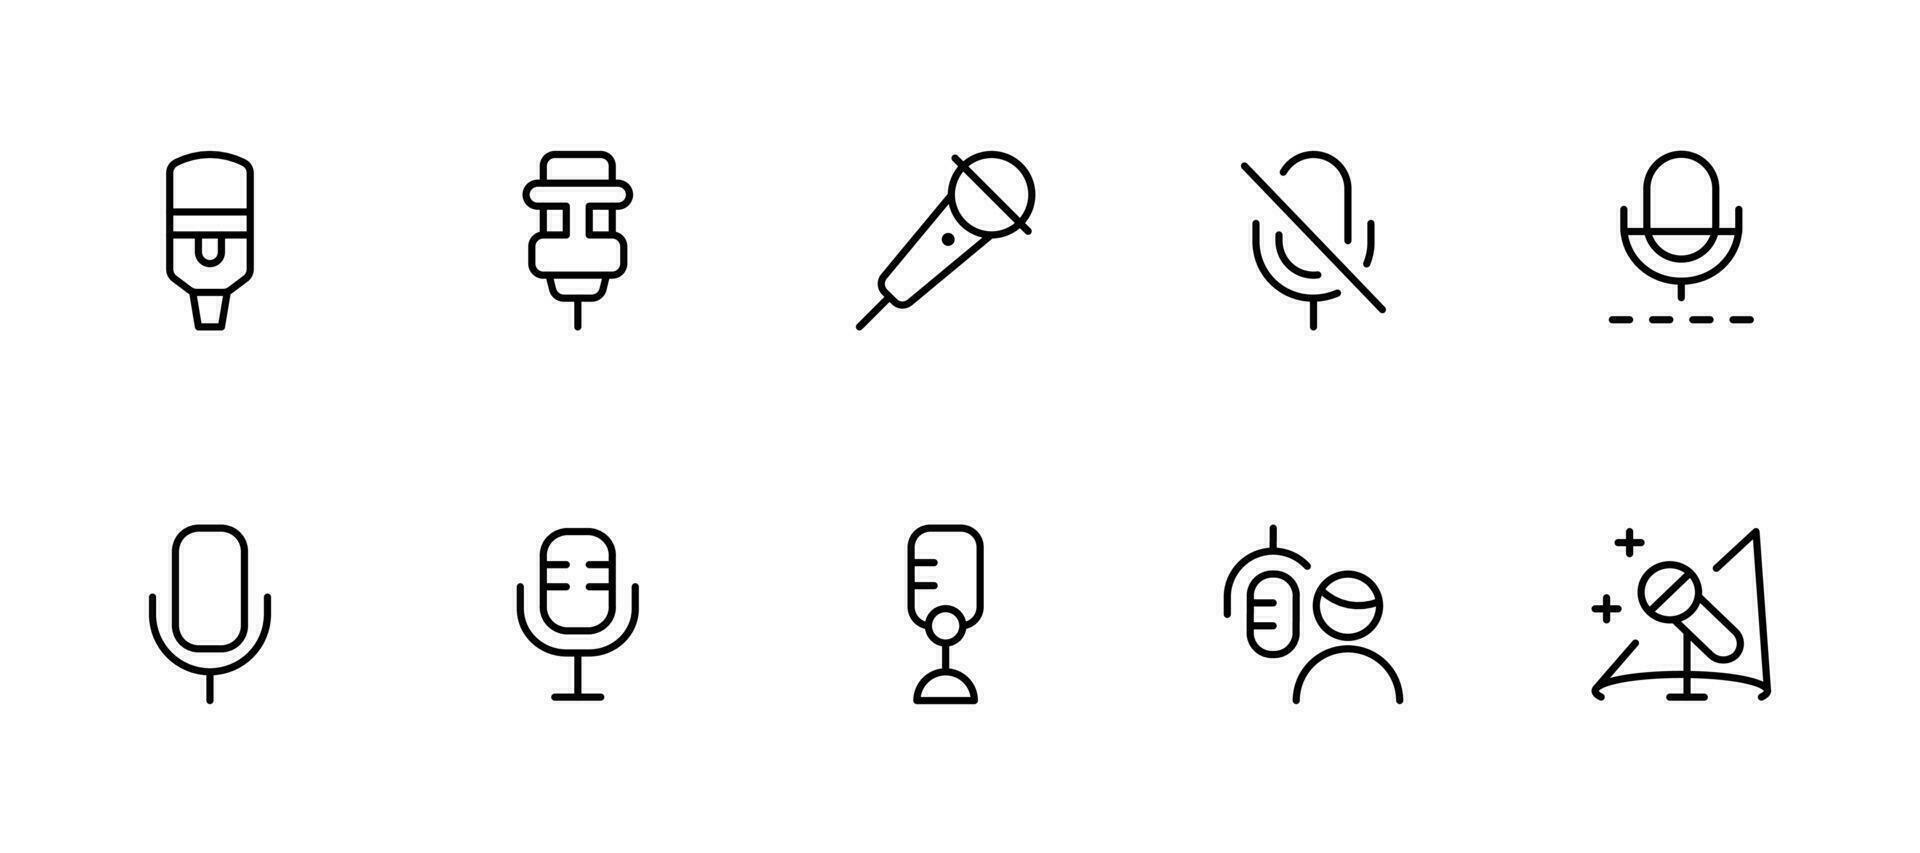 Microphone Icons set. variant microphone icon. Karaoke mic. Podcast microphone. Editable Stroke. Line, Solid, Flat Line, and Suitable for Web Page, Mobile App, UI, UX design. vector